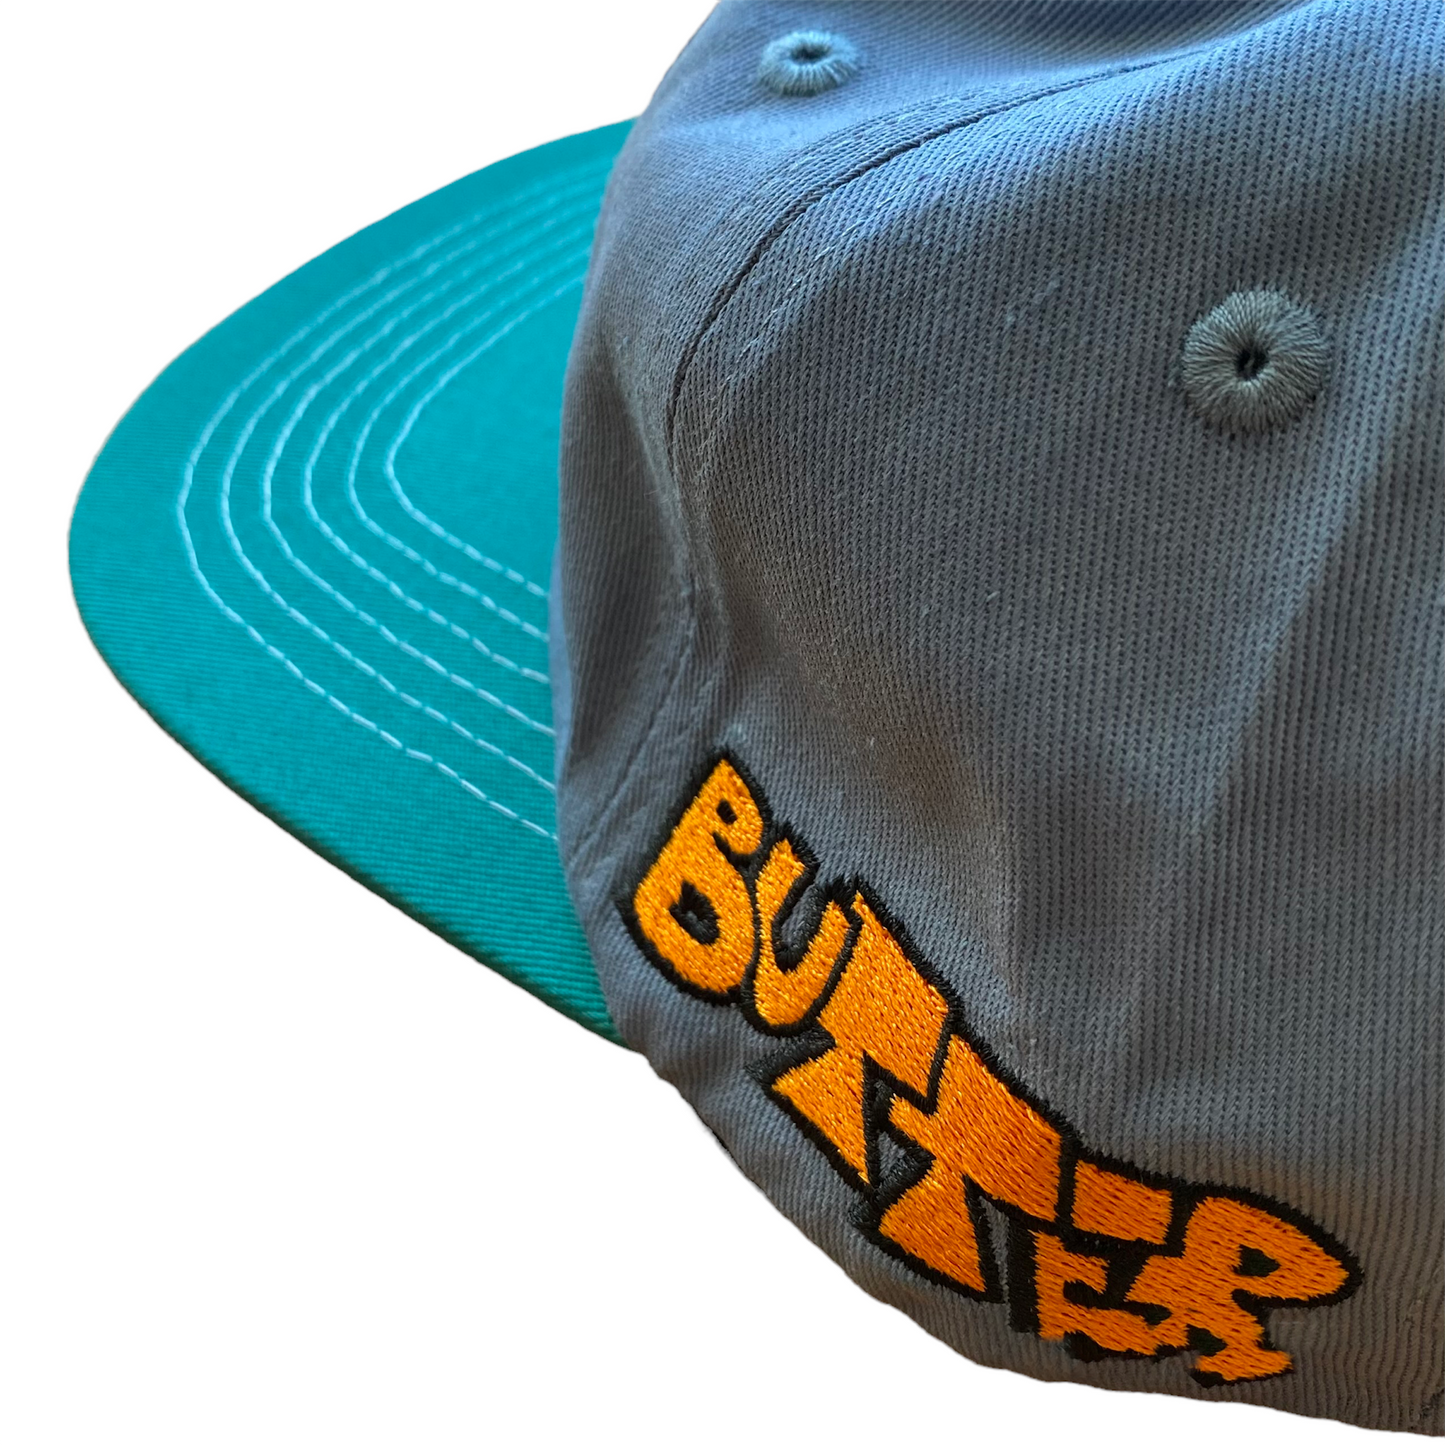 BUG OUT 6 PANEL CAP